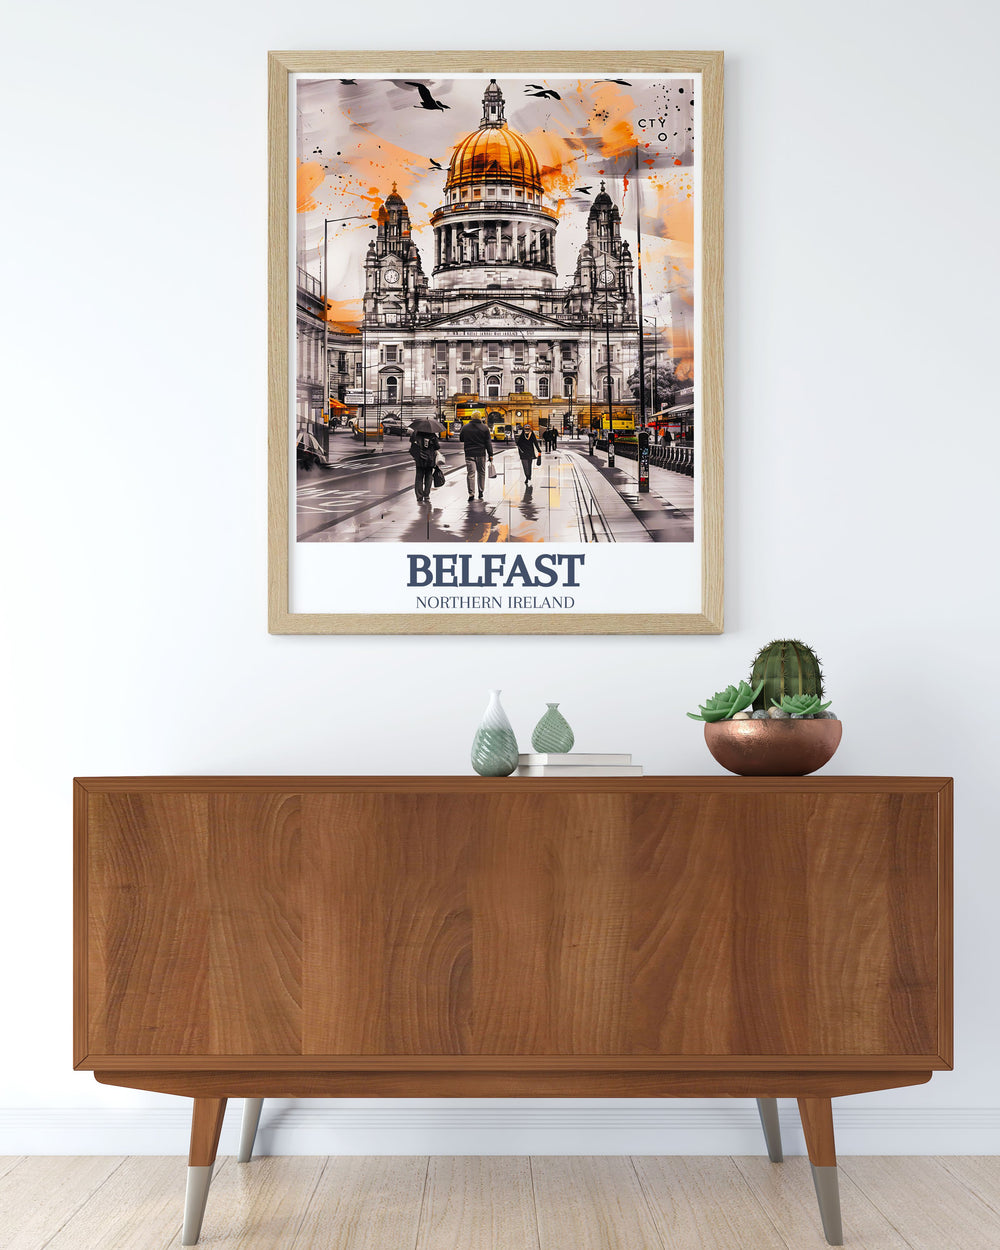 Stunning City Hall Donegall Square artwork capturing the grandeur of Belfasts City Hall and the bustling Donegall Square. Ideal as a Belfast wall poster or Ireland poster, bringing a piece of UK wall art into your home.